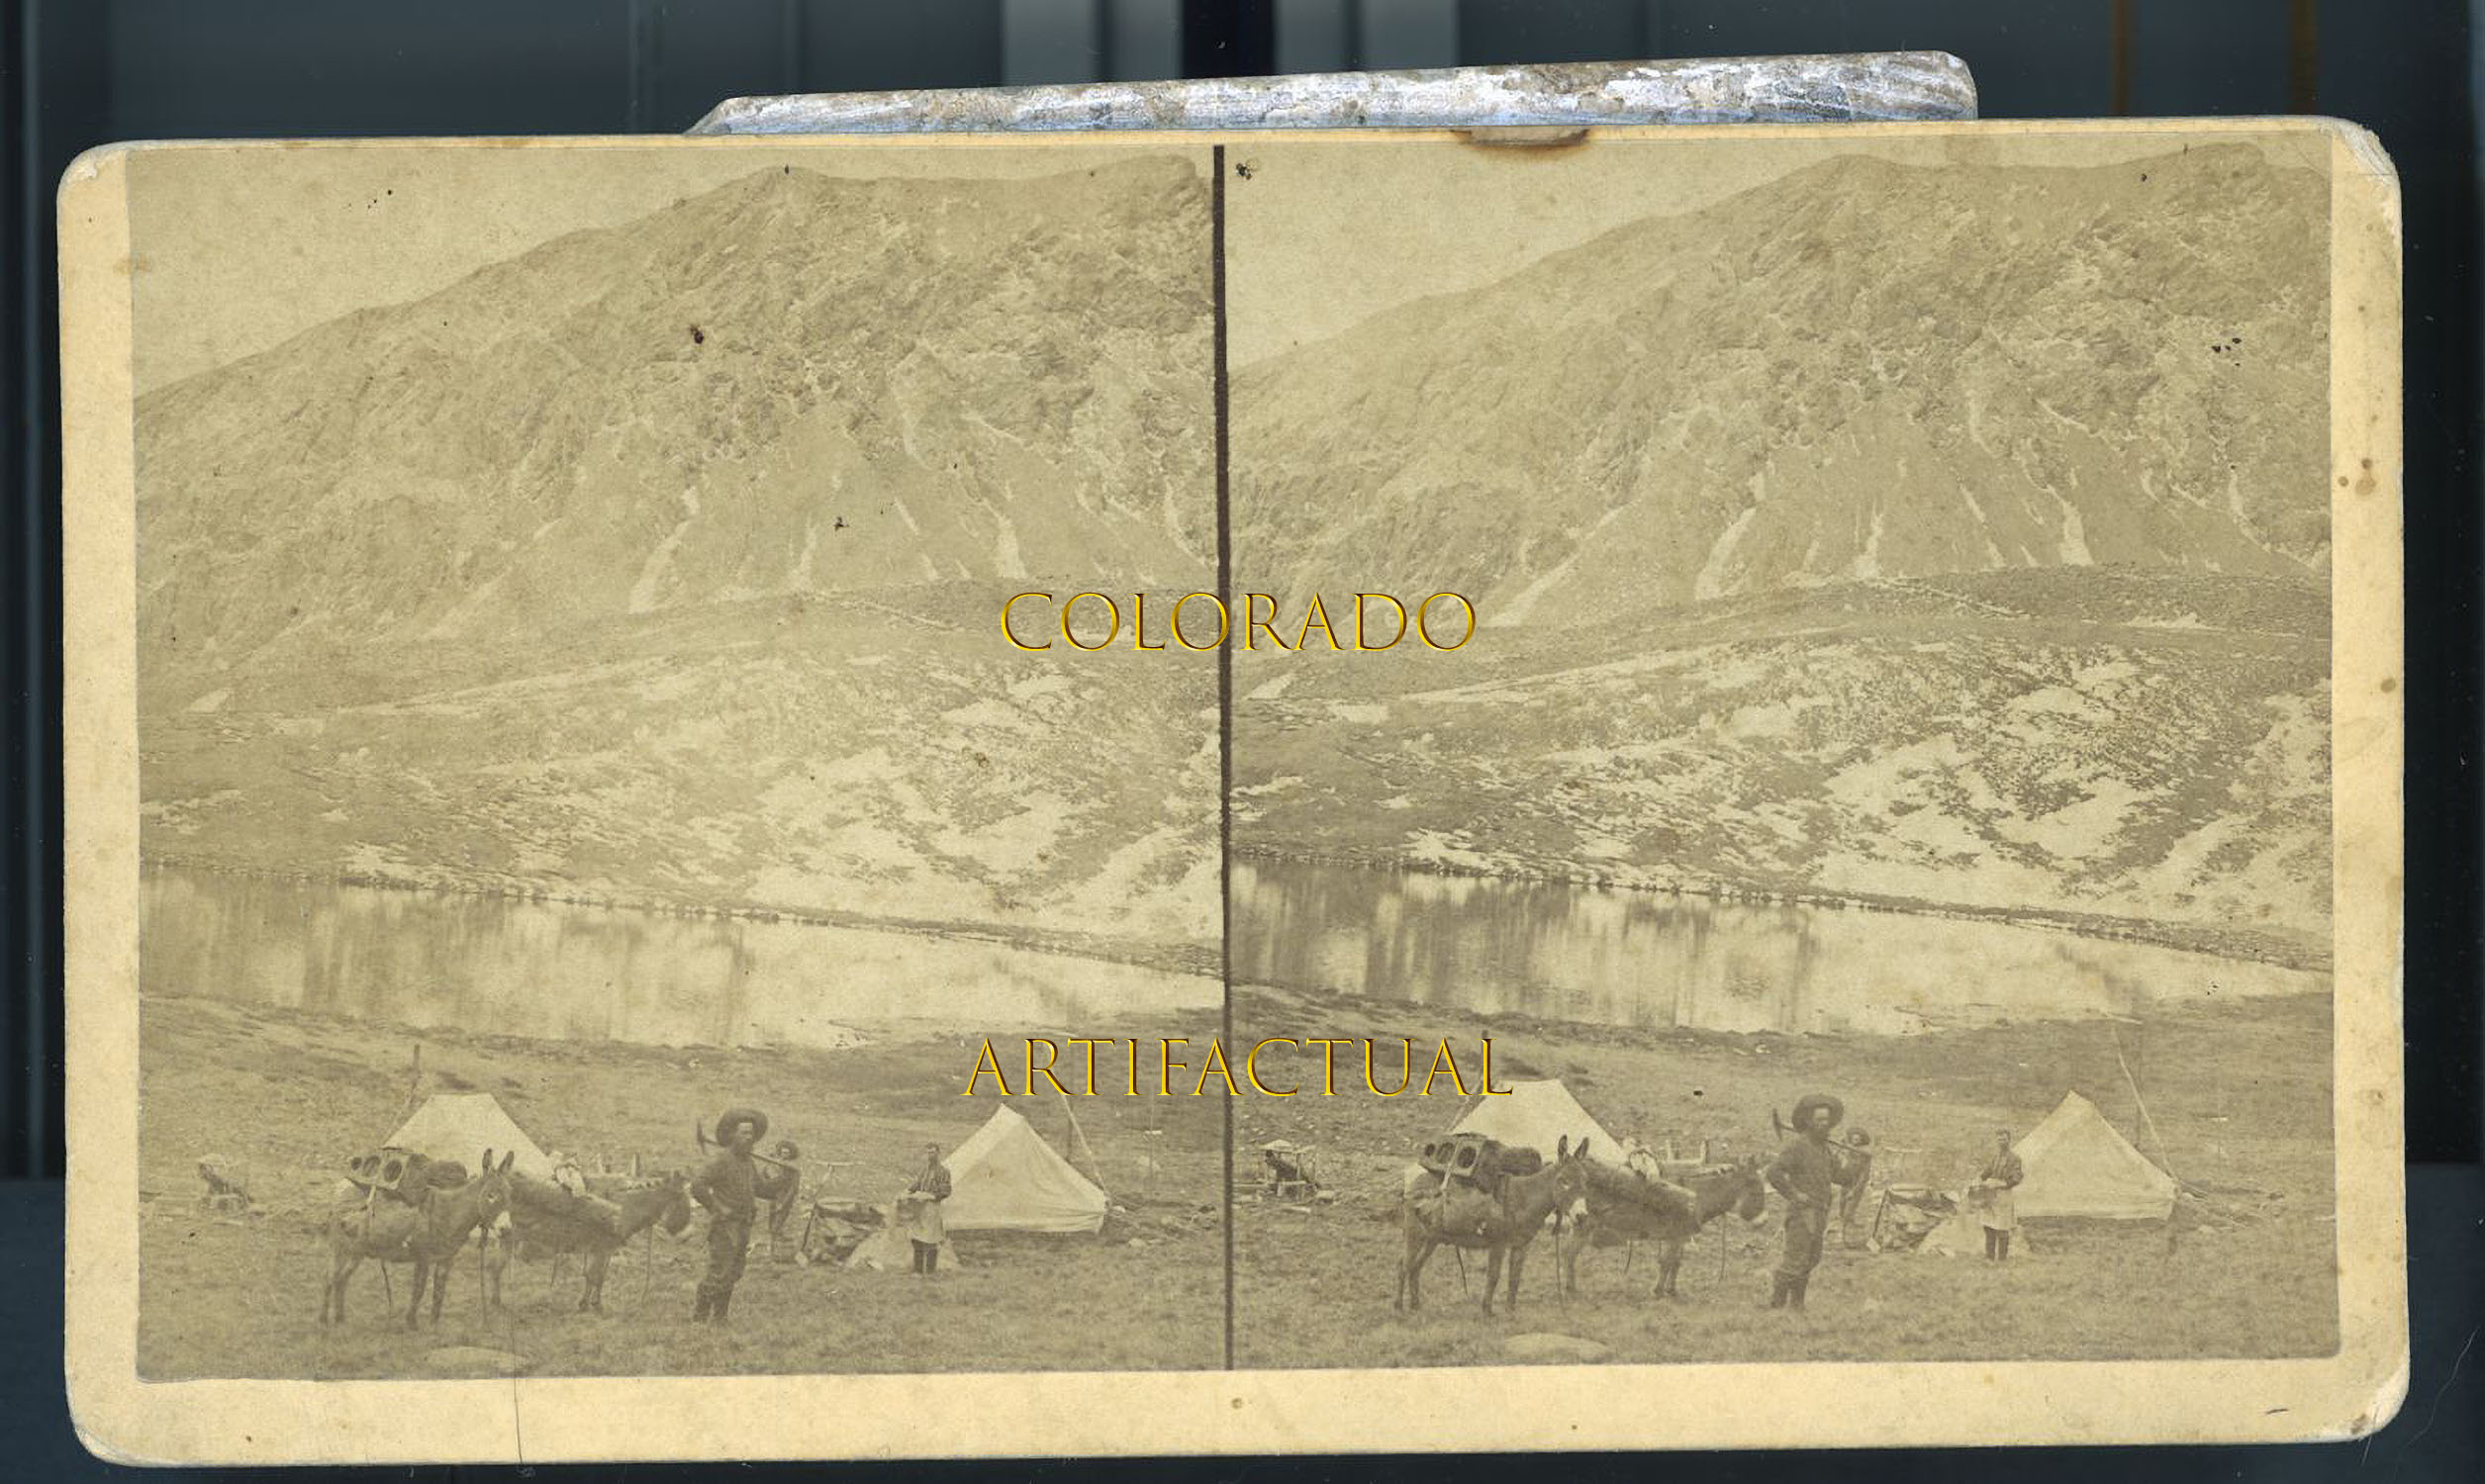 Summit County Colorado prospector & camp Churchell stereo view photograph 1880